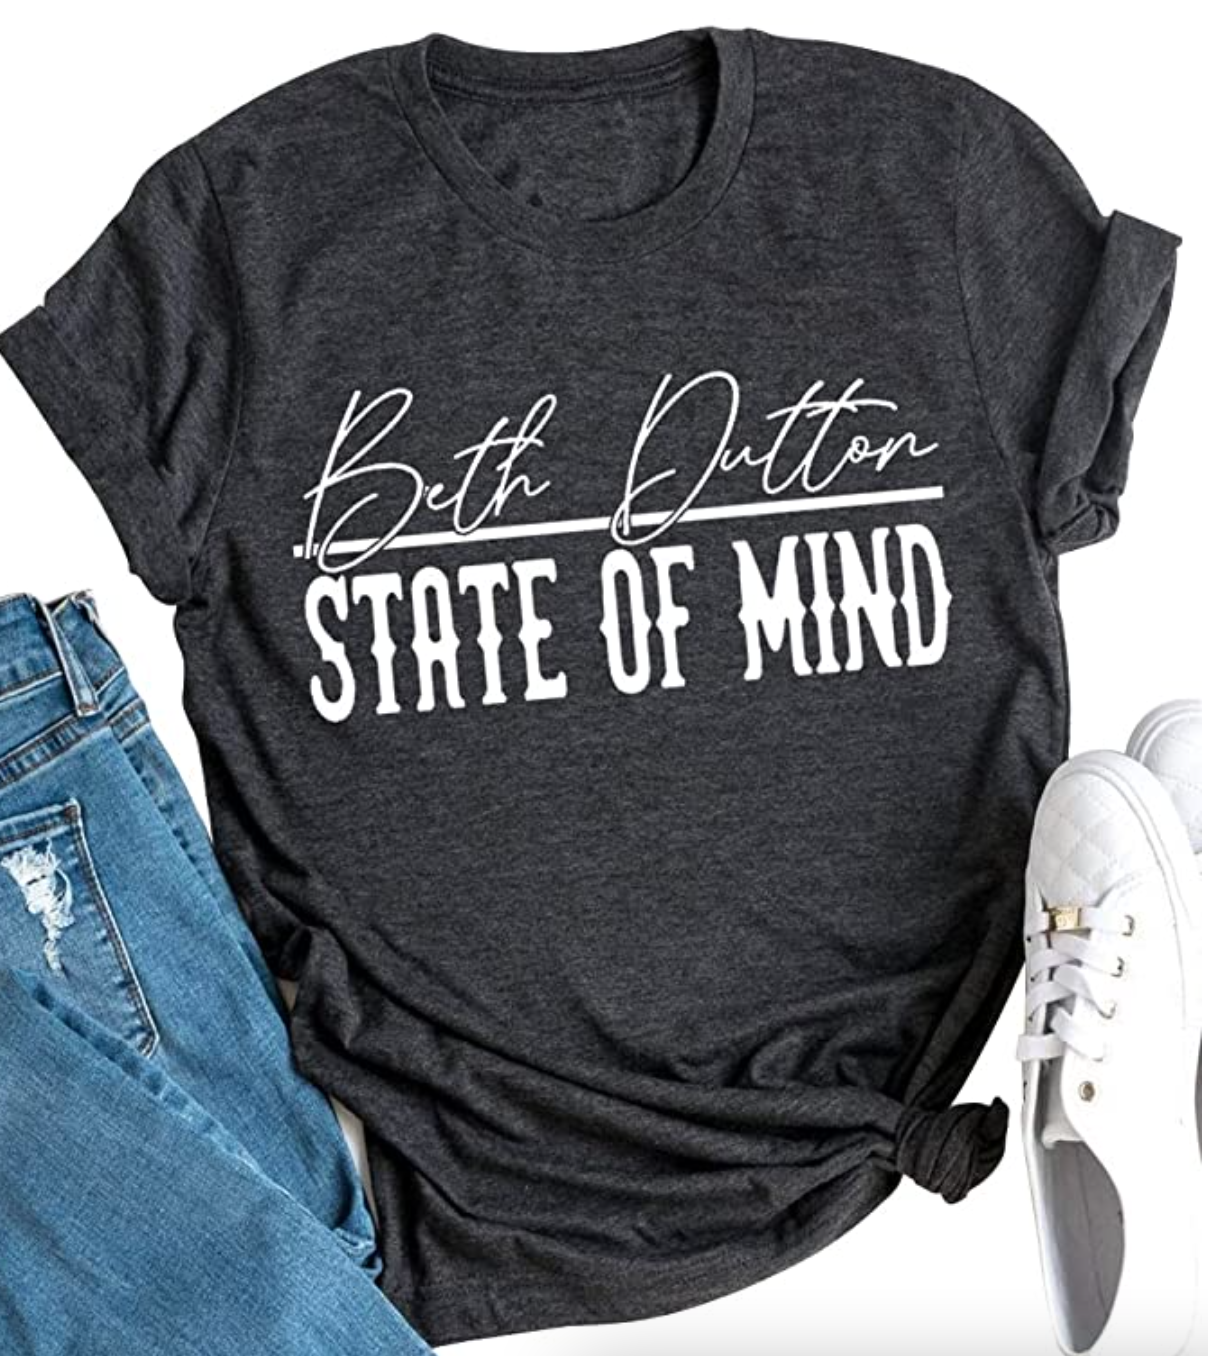 Women Funny Letter t Shirt Beth Dutton State of Mind Novelty Short-Sleeve Tees Tops